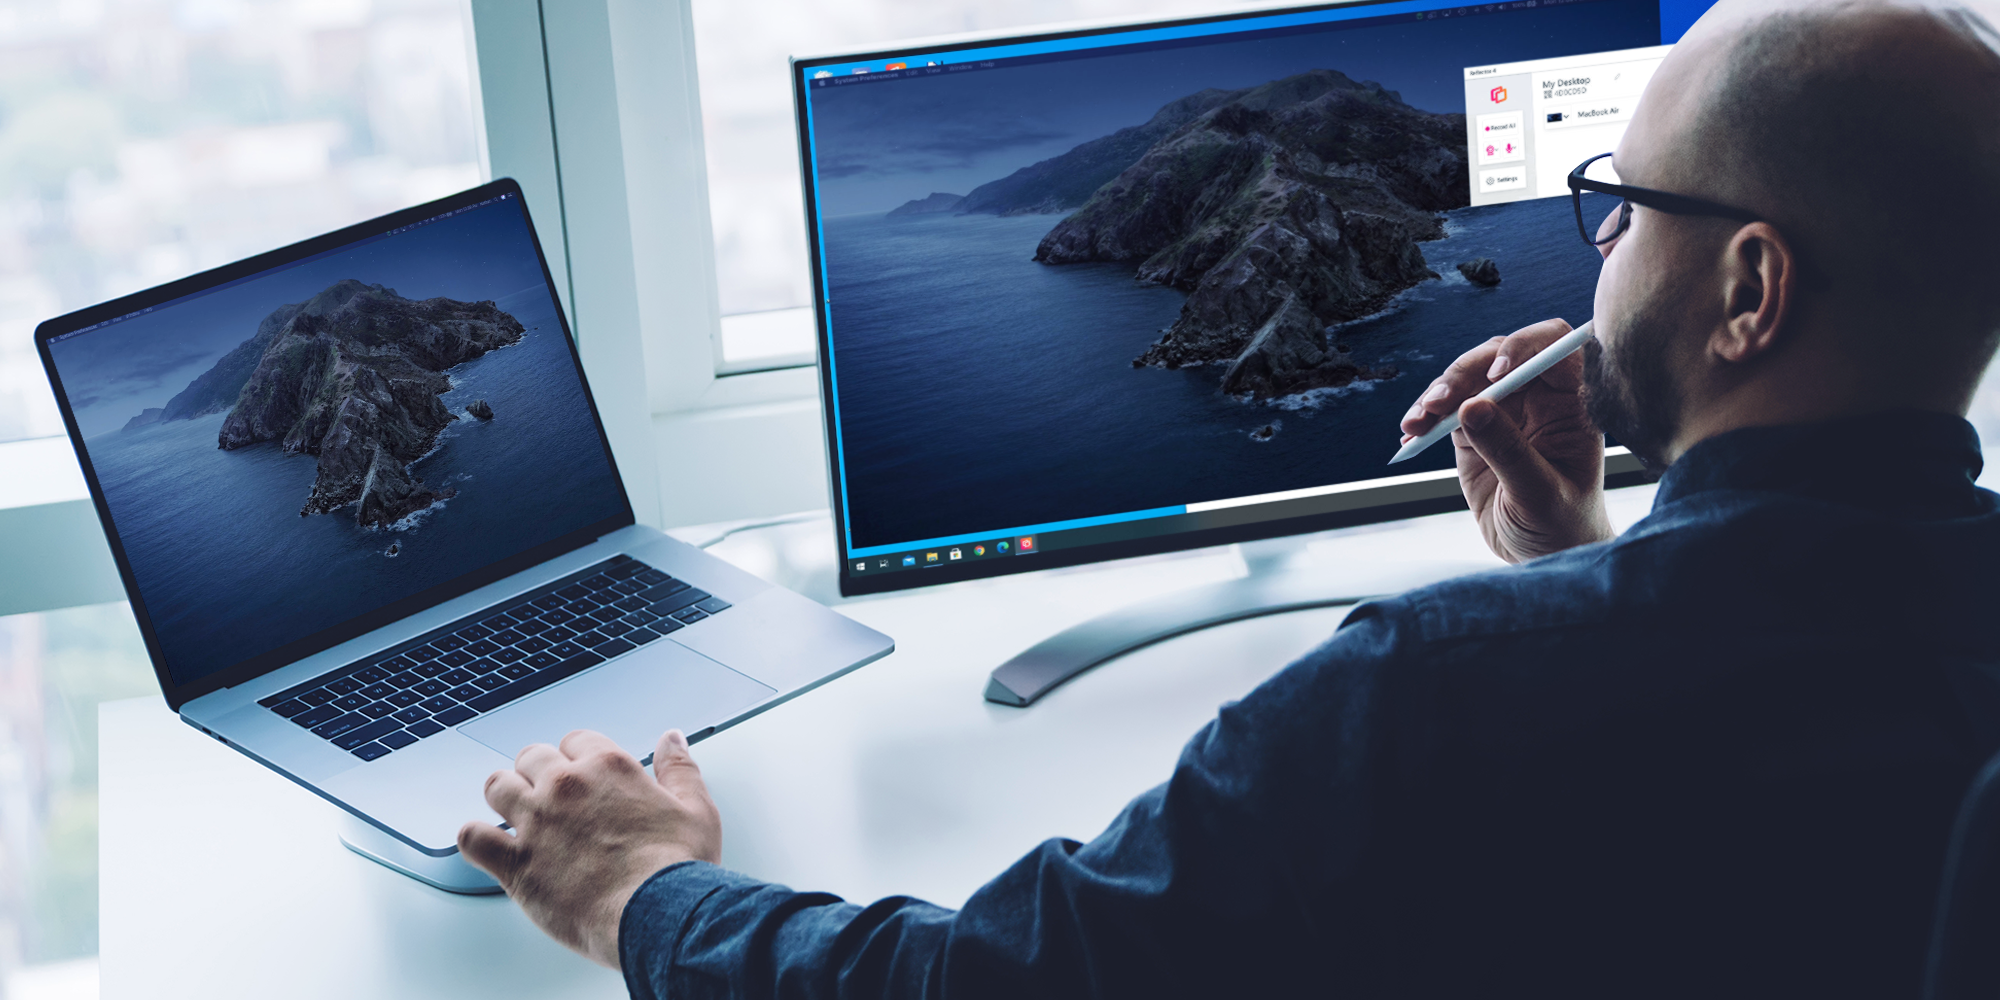 How to Extend Mac Desktop to Windows - Featured Image